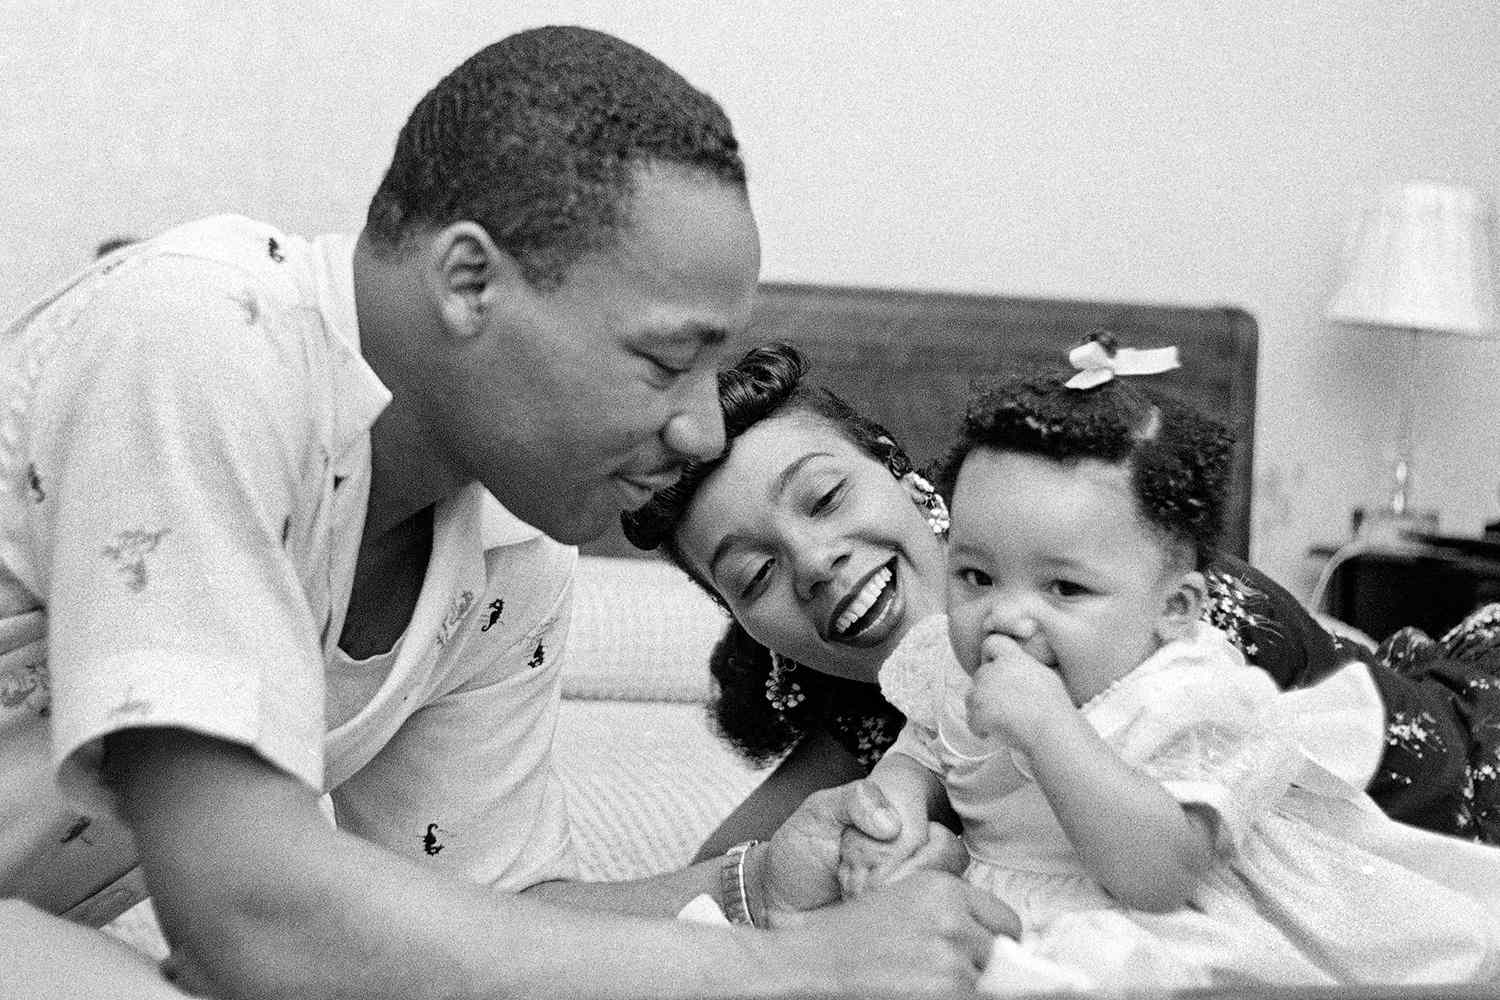 Civil rights leader Reverend Martin Luther King, Jr. relaxes at home with his wife Coretta and first child Yolanda in May 1956 in Montgomery, Alabama